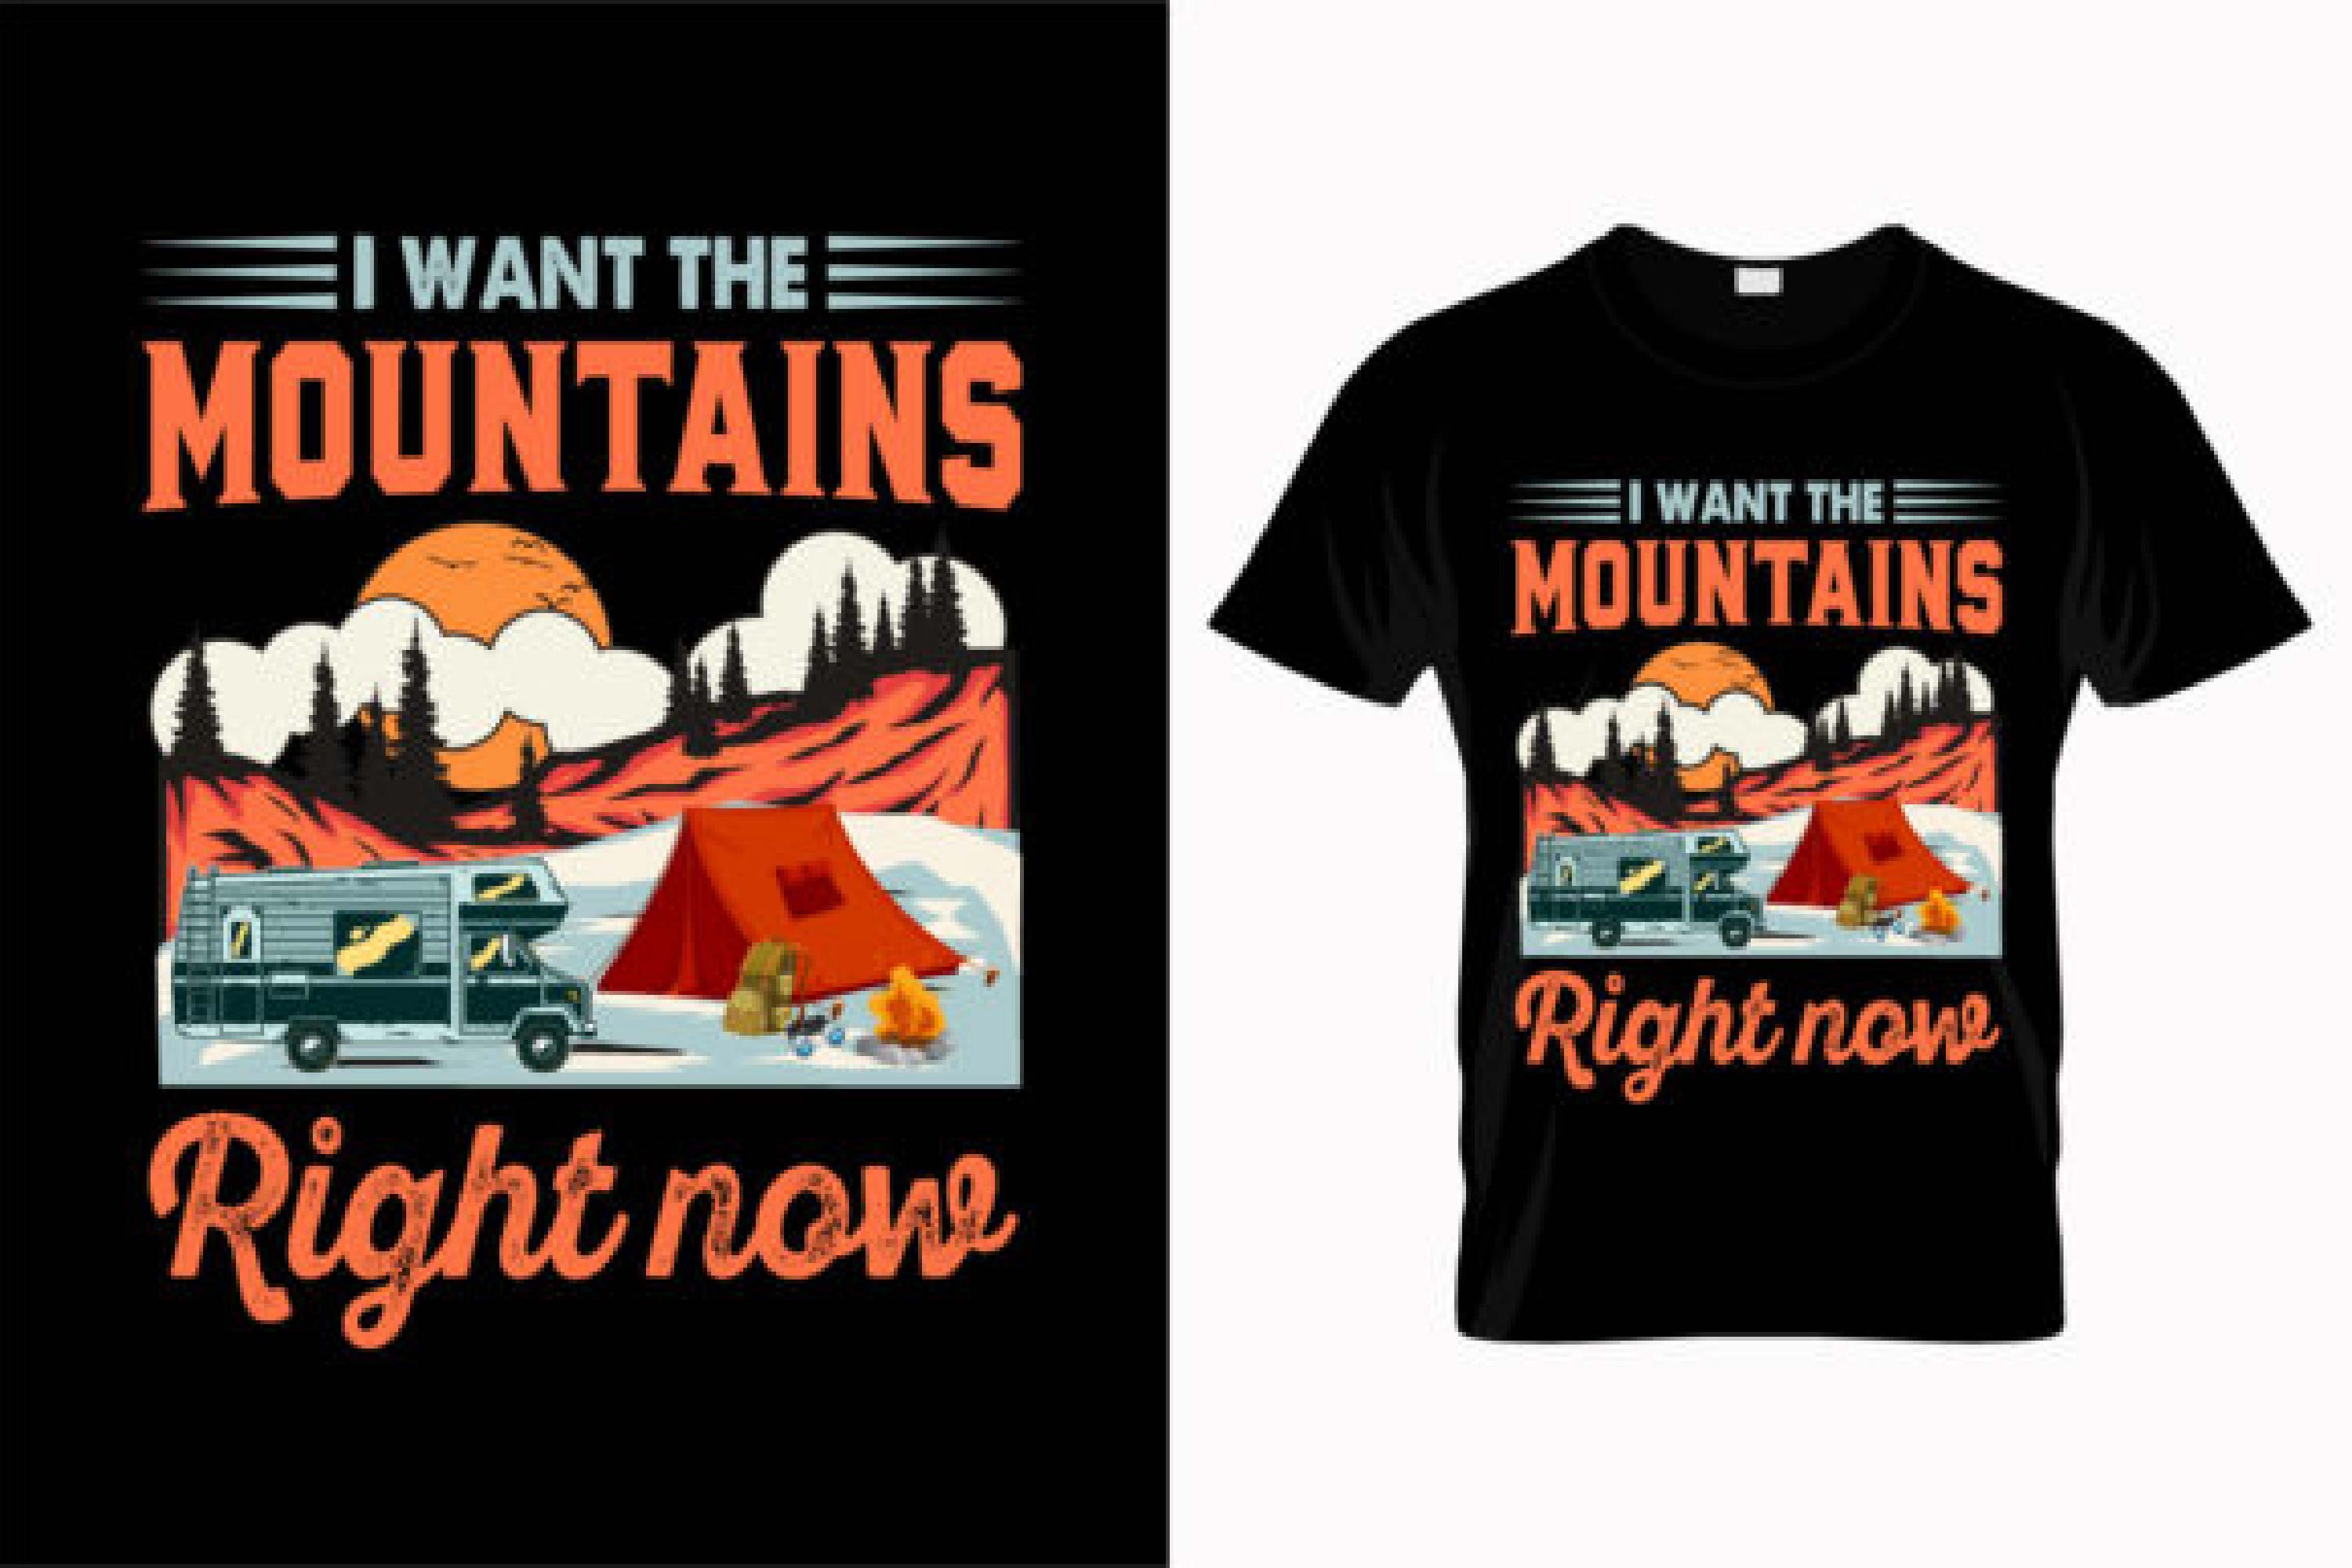 Image of a black t-shirt with a gorgeous camping themed print and a colorful landscape.